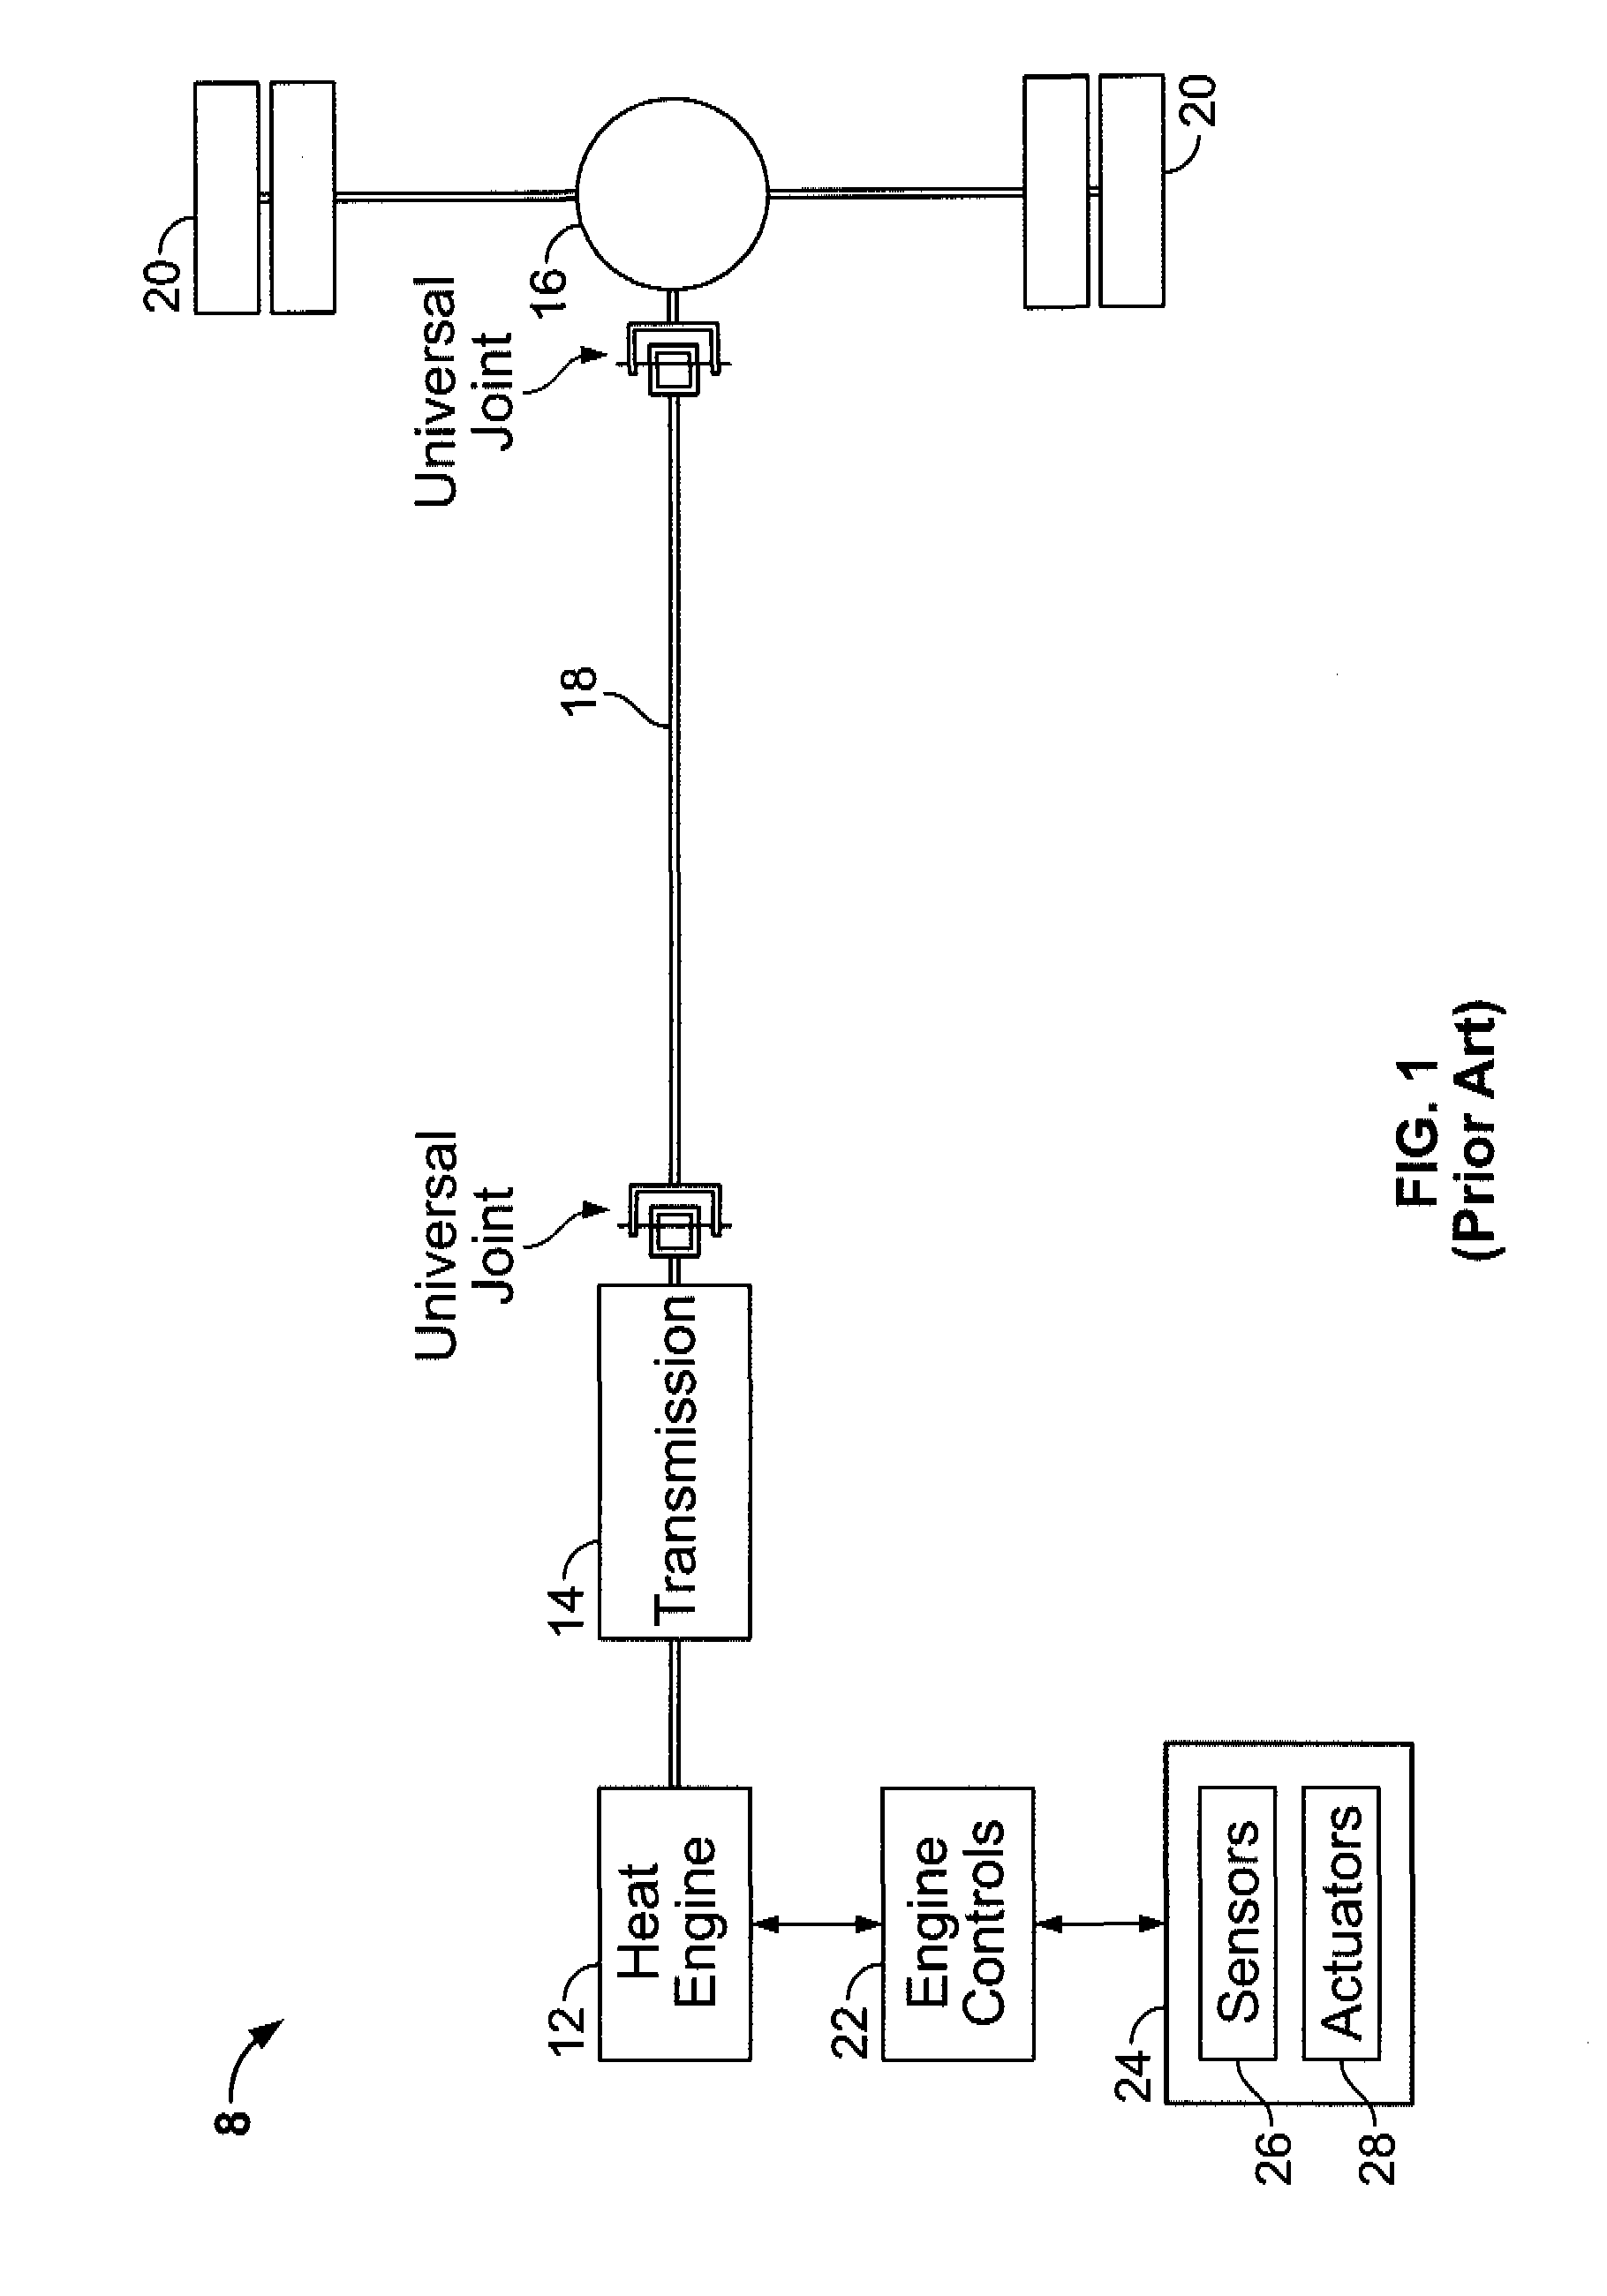 Hybrid drive system and method of installing same